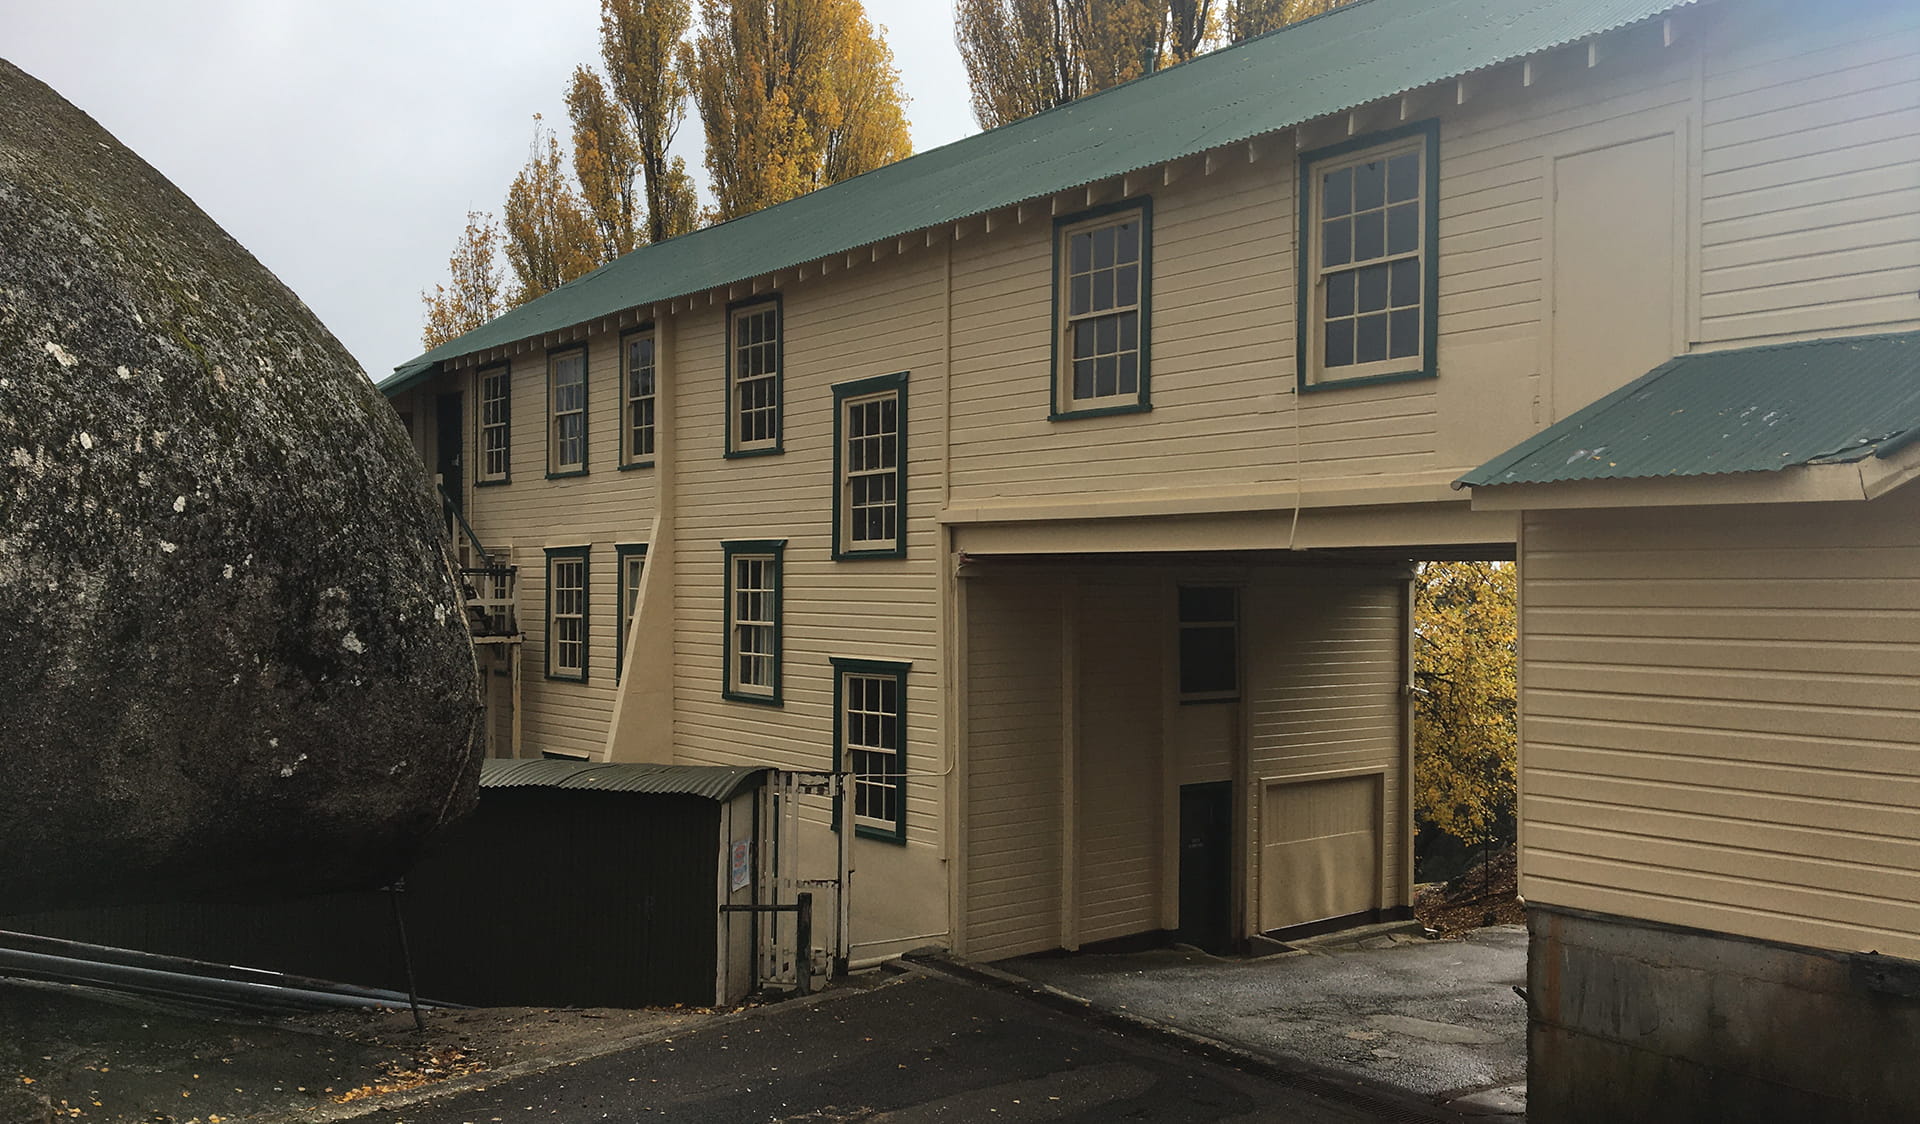 Maintenance works at Mount Buffalo Chalet -  North Wing repaint and repair, after 24 April 2020.